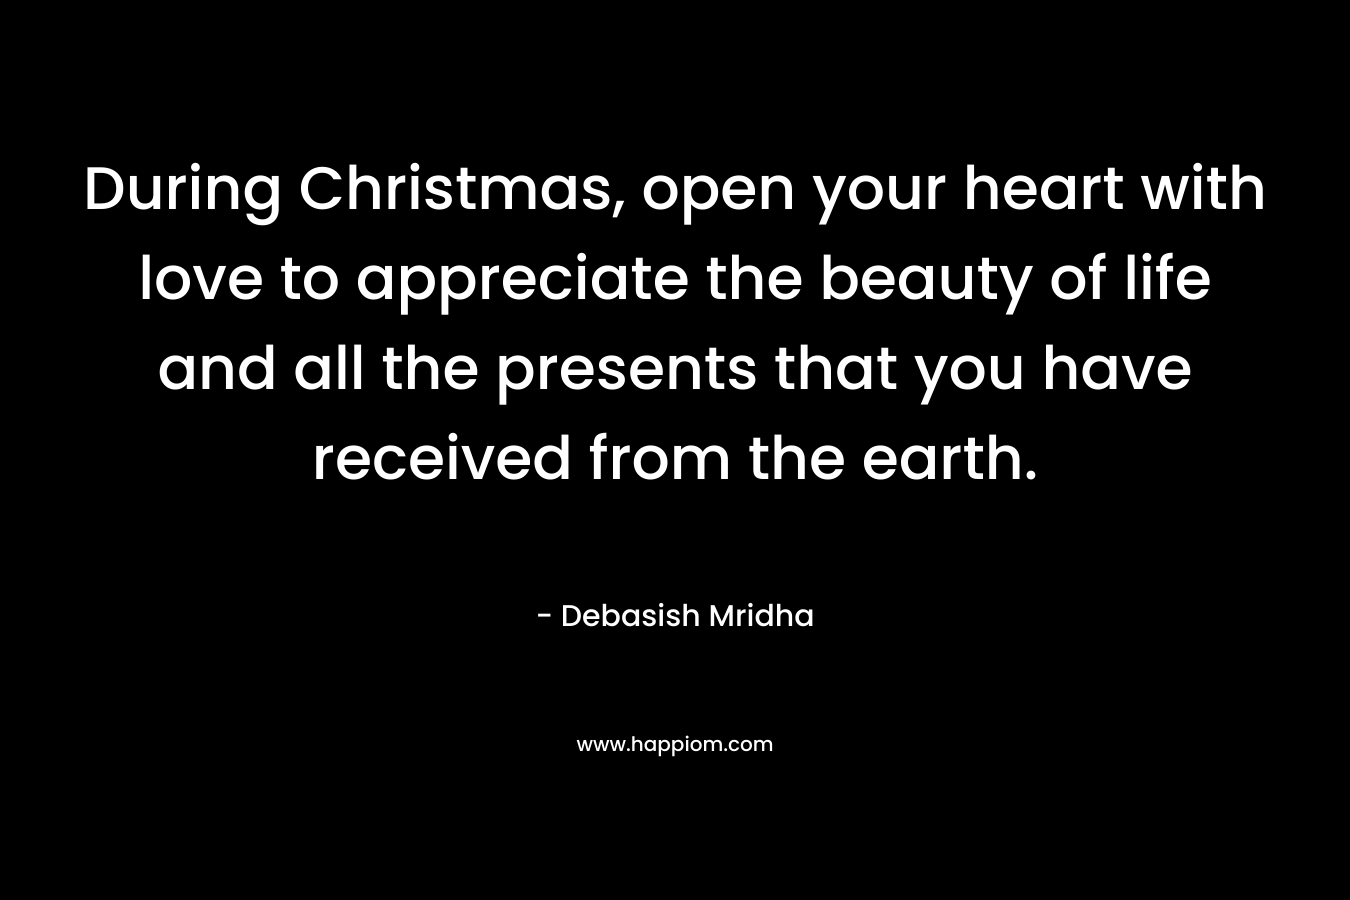 During Christmas, open your heart with love to appreciate the beauty of life and all the presents that you have received from the earth.